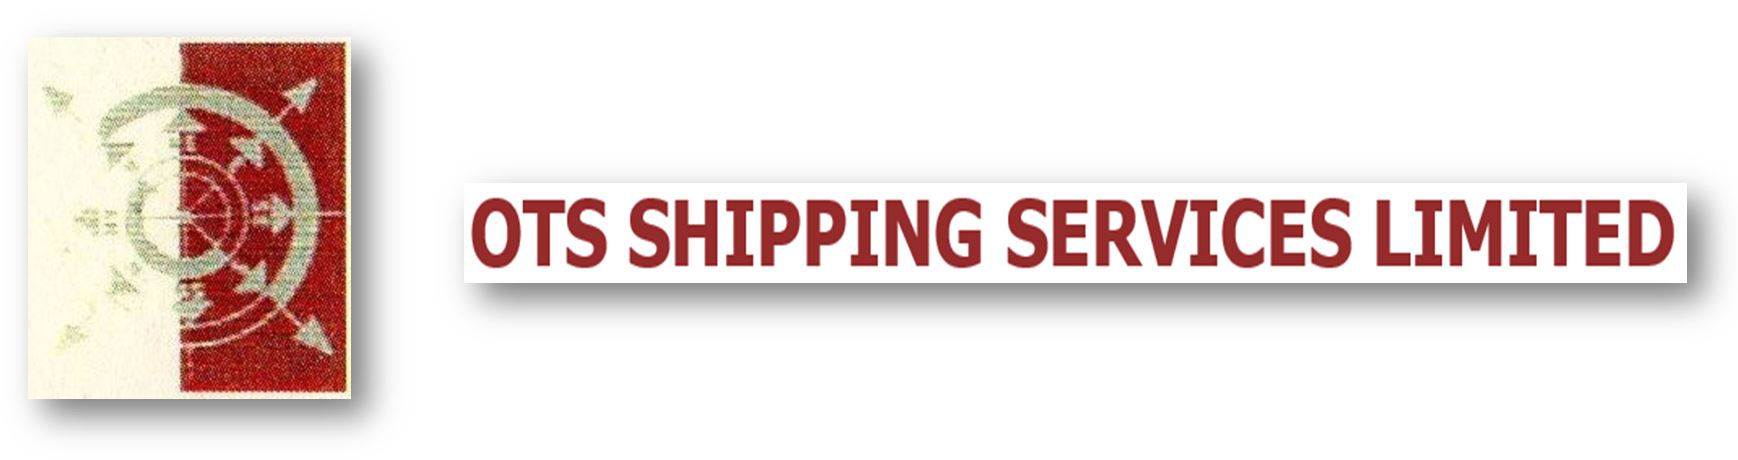 OTS SHIPPING SERVICES LIMITED